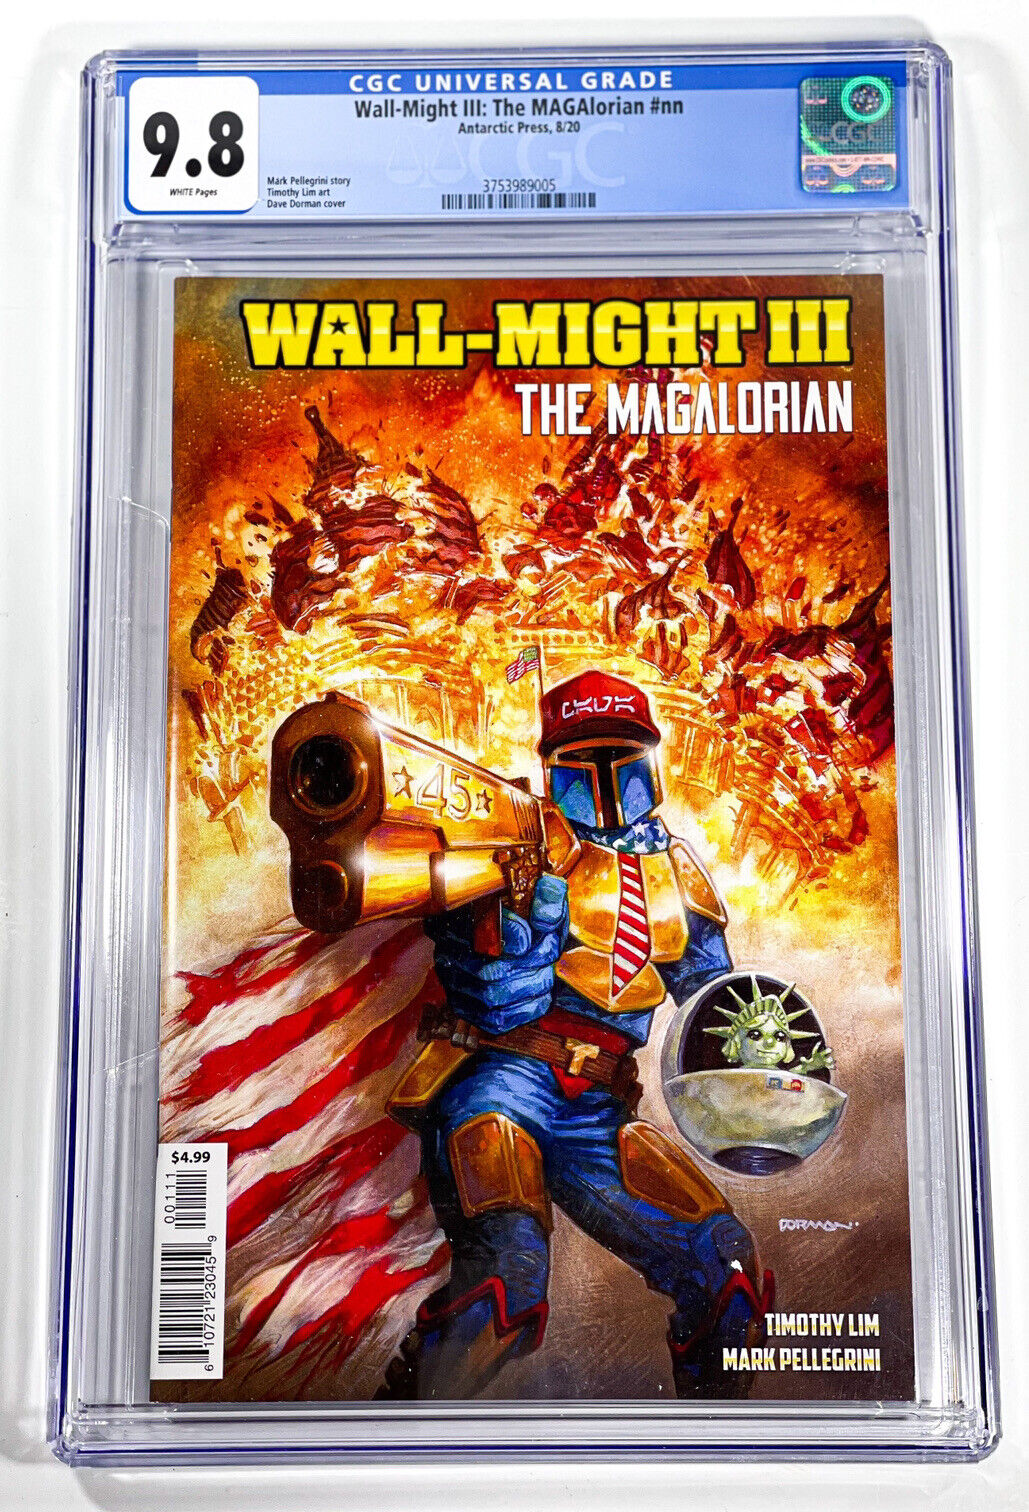 Wall-Might III: The Magalorian (2020) #1 - Dave Dorman Cover - Trump CGC 9.8